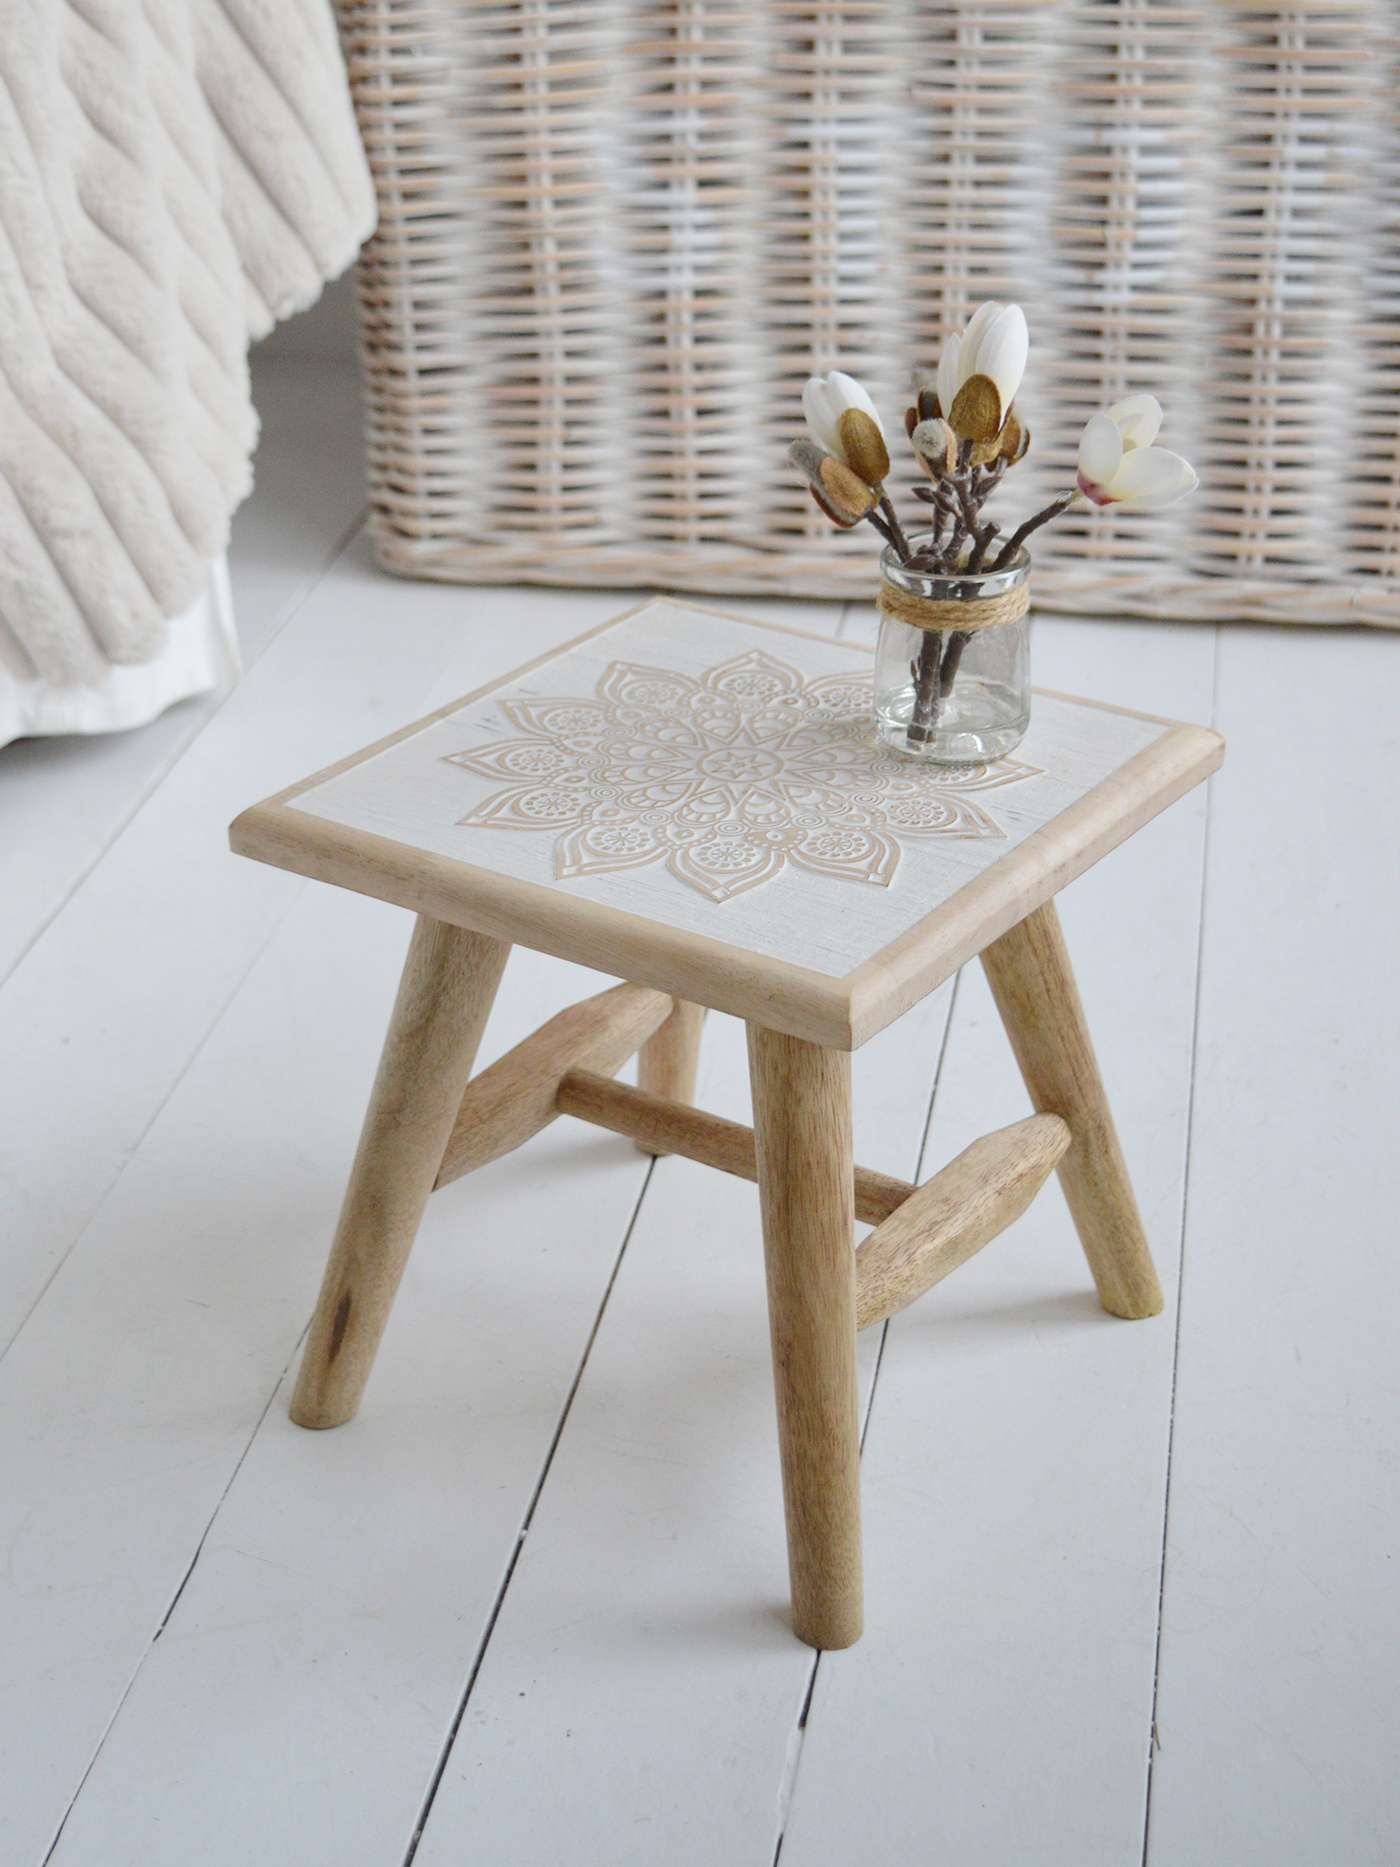 Palmer wooden milking stool - New England coastal and country interiors